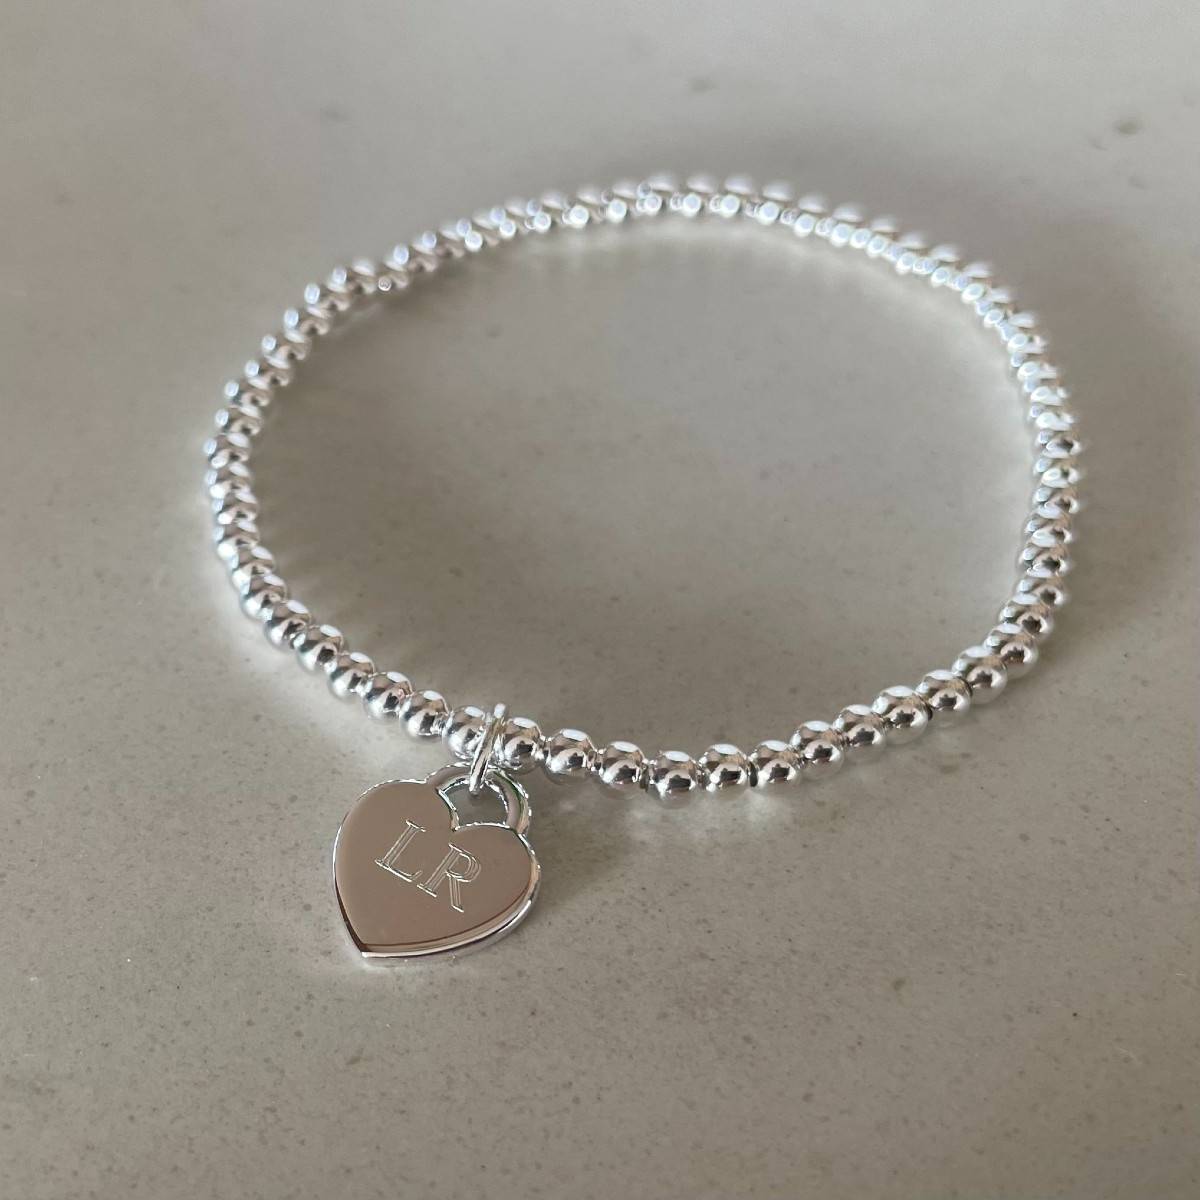 mini heart stretch bracelet with initial LR engraved